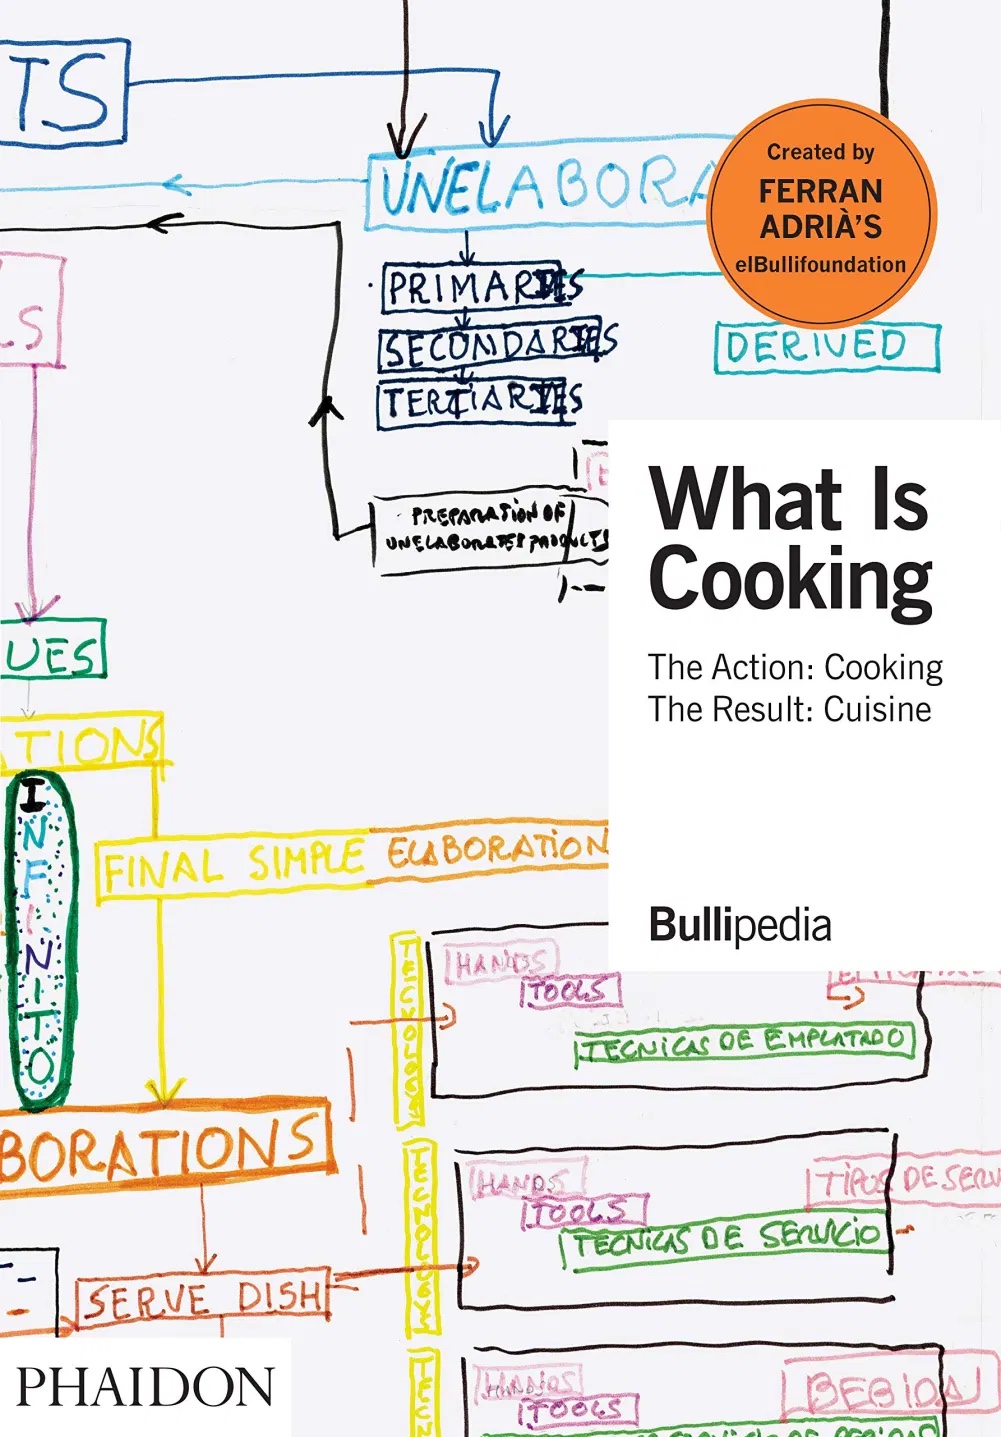 What is Cooking / Ferran Adrià